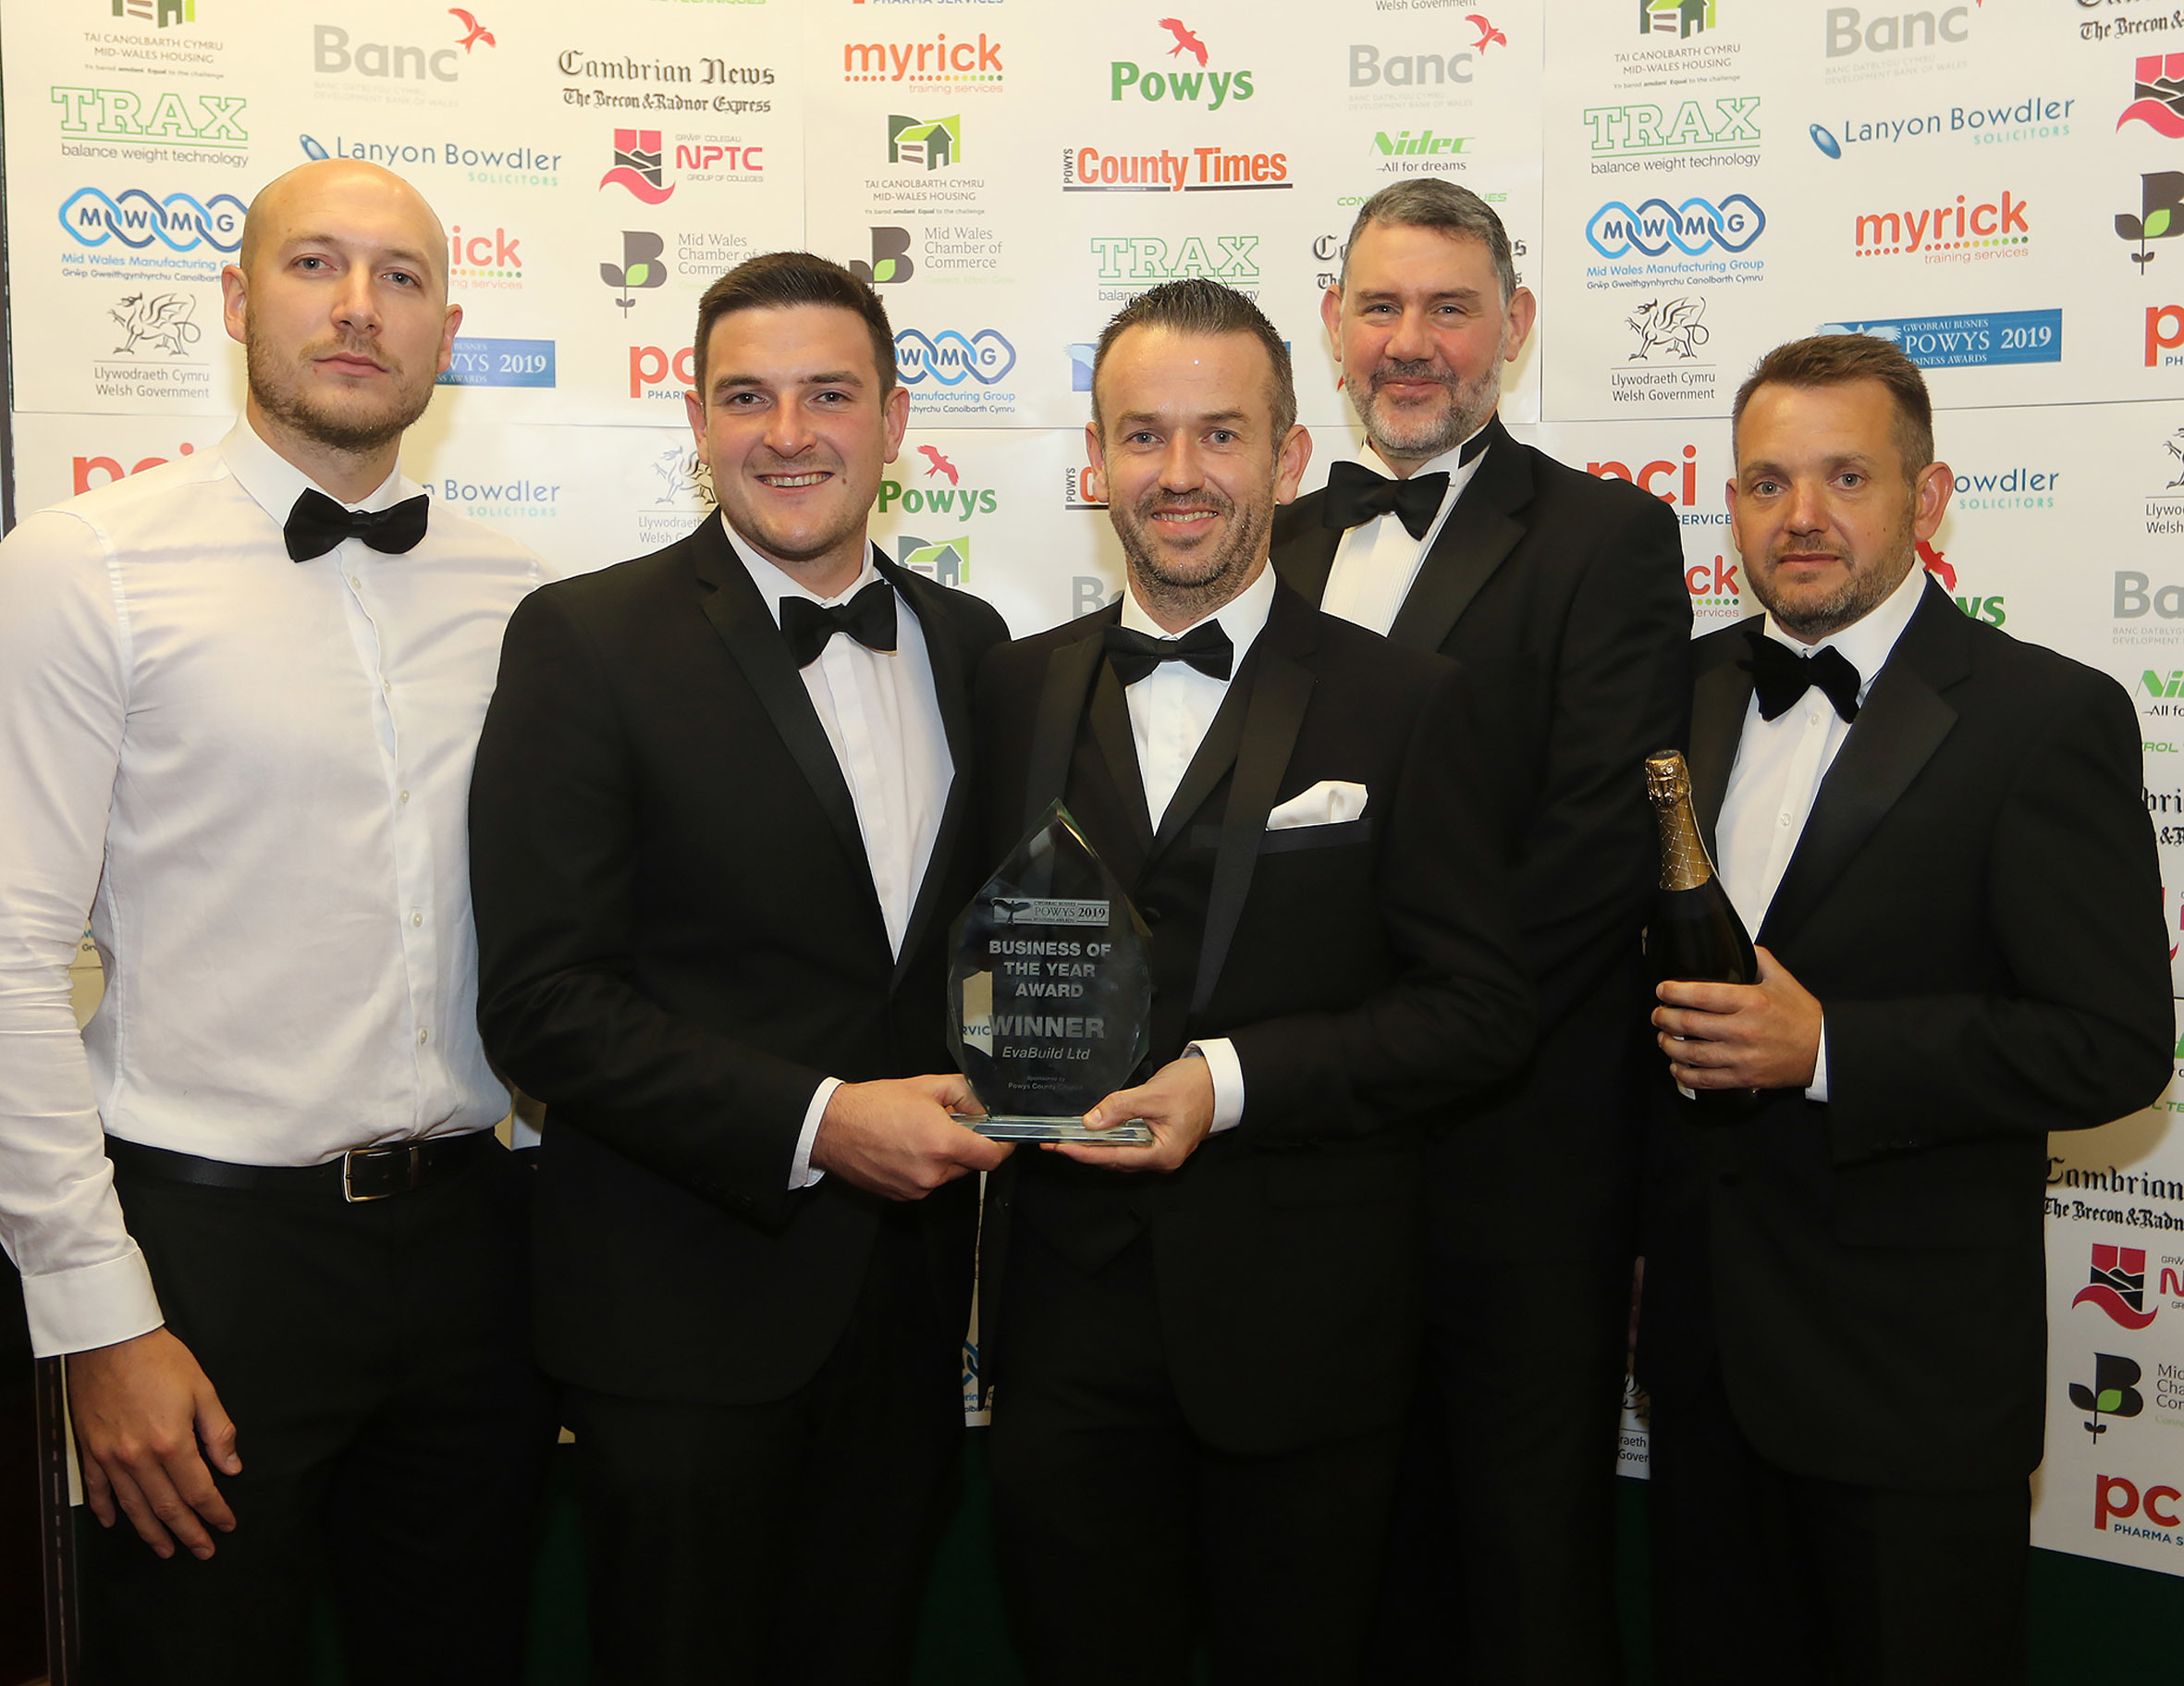 Powys Business Awards 2019..Powys Business of the Year 2019 Winners, EvaBuild Ltd, Newtown..Picture by Phil Blagg..PB490-2019-107.